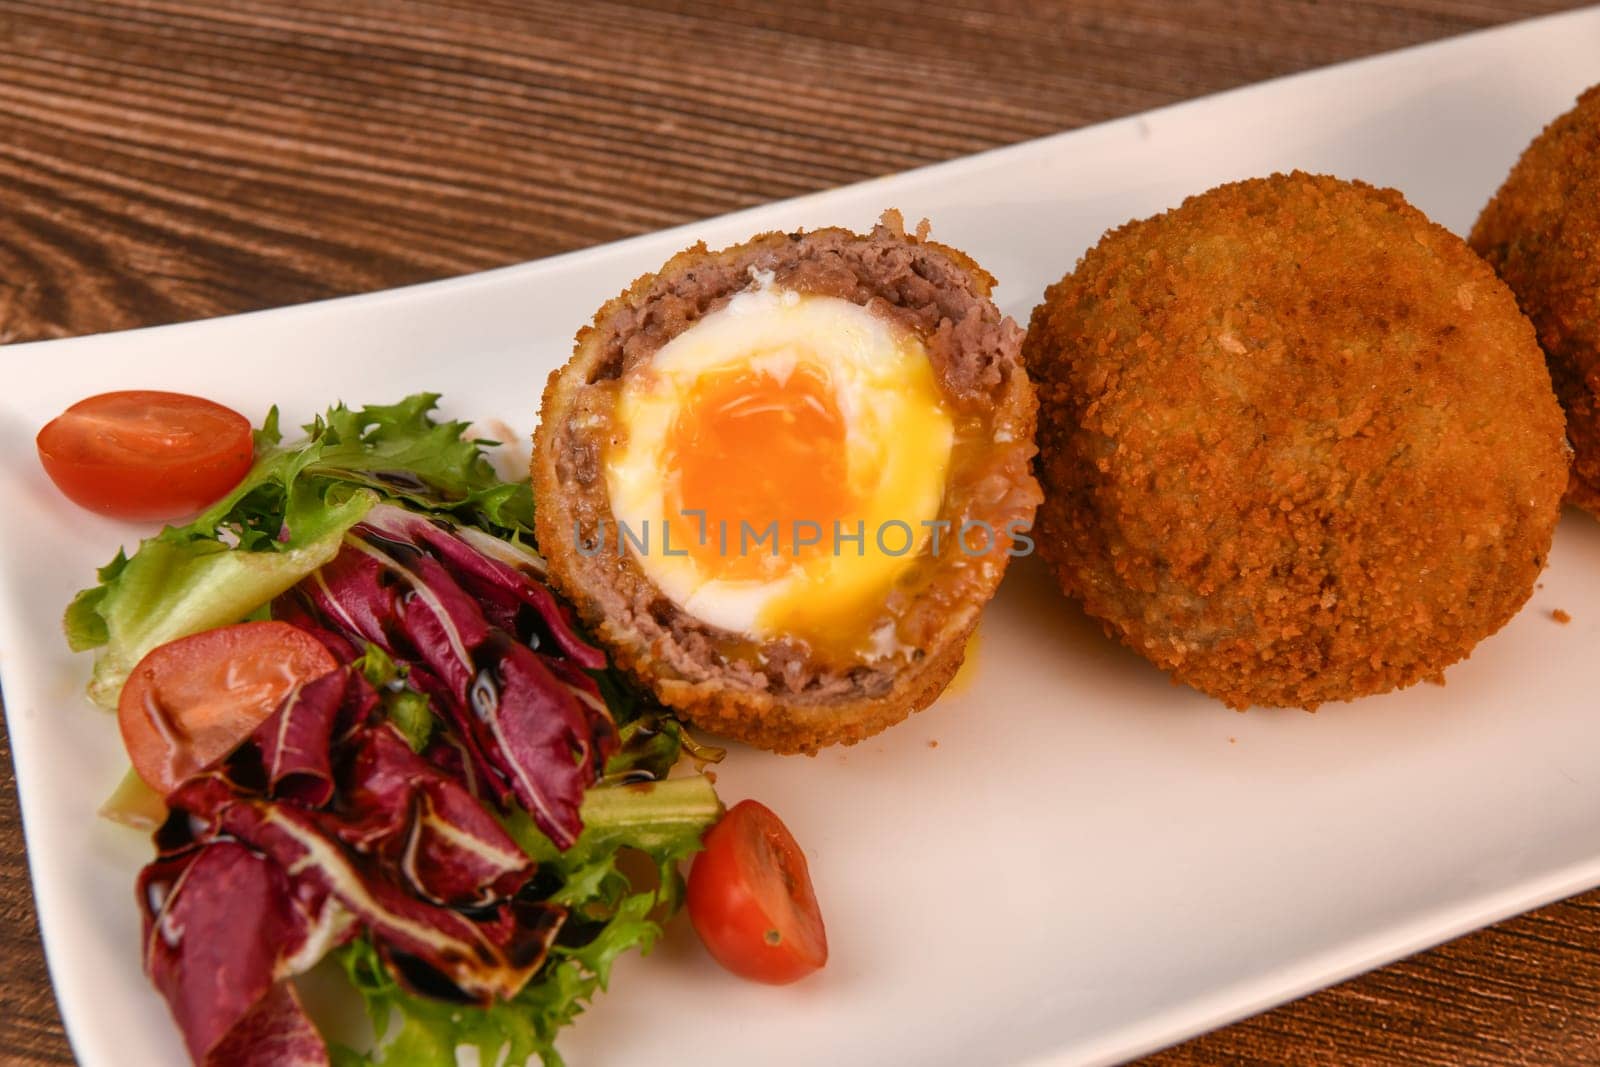 RECIPE FOR BREADED BEEF MEATBALLS STUFFED WITH A SOFT BOILED EGG by FreeProd